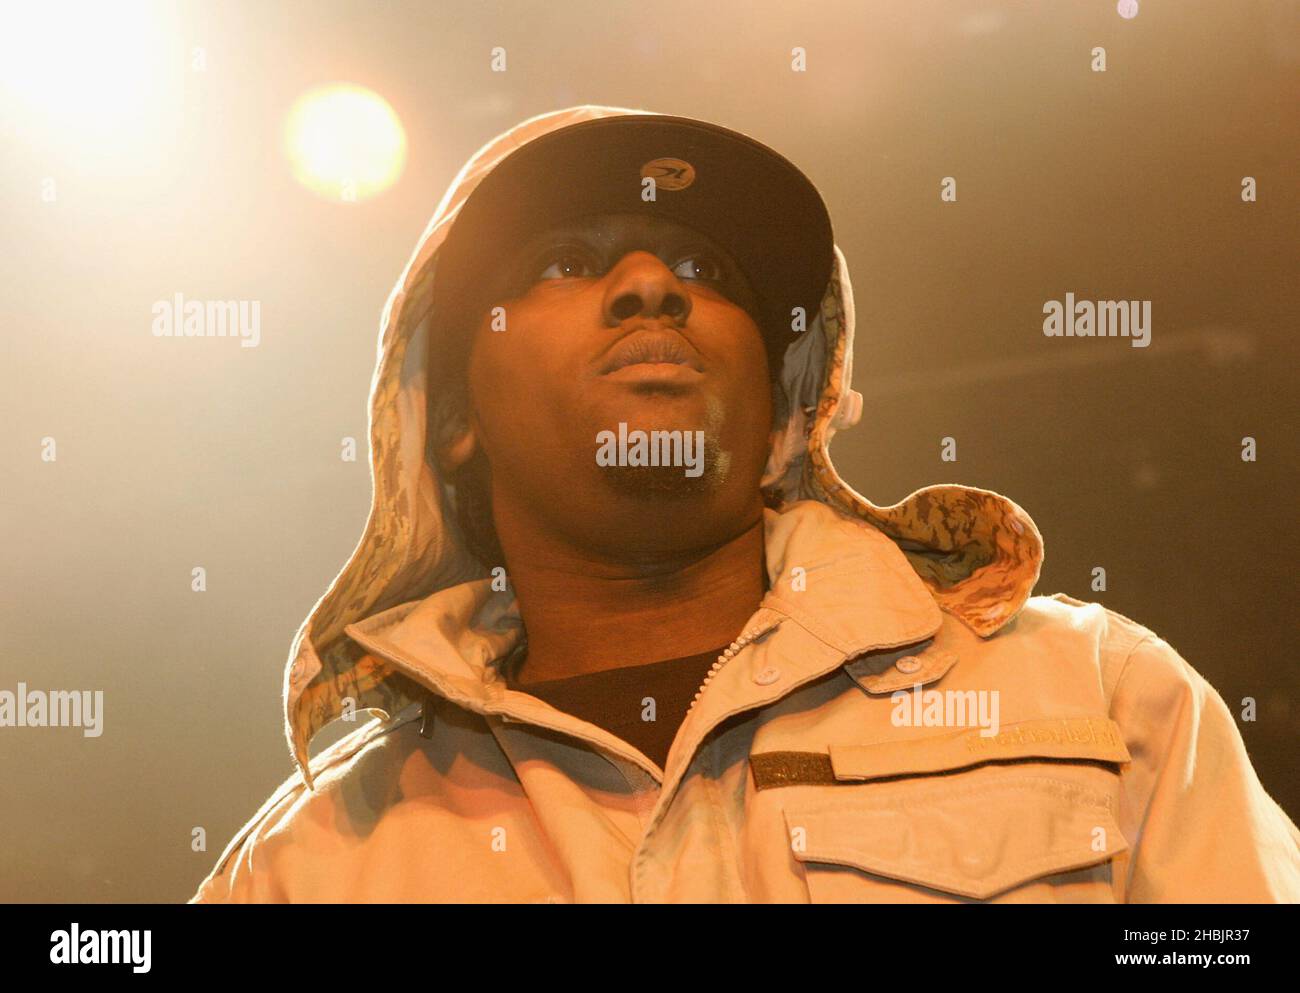 British rapper Sway performs at the Carling Academy Islington on March 10, 2006 in London. Stock Photo